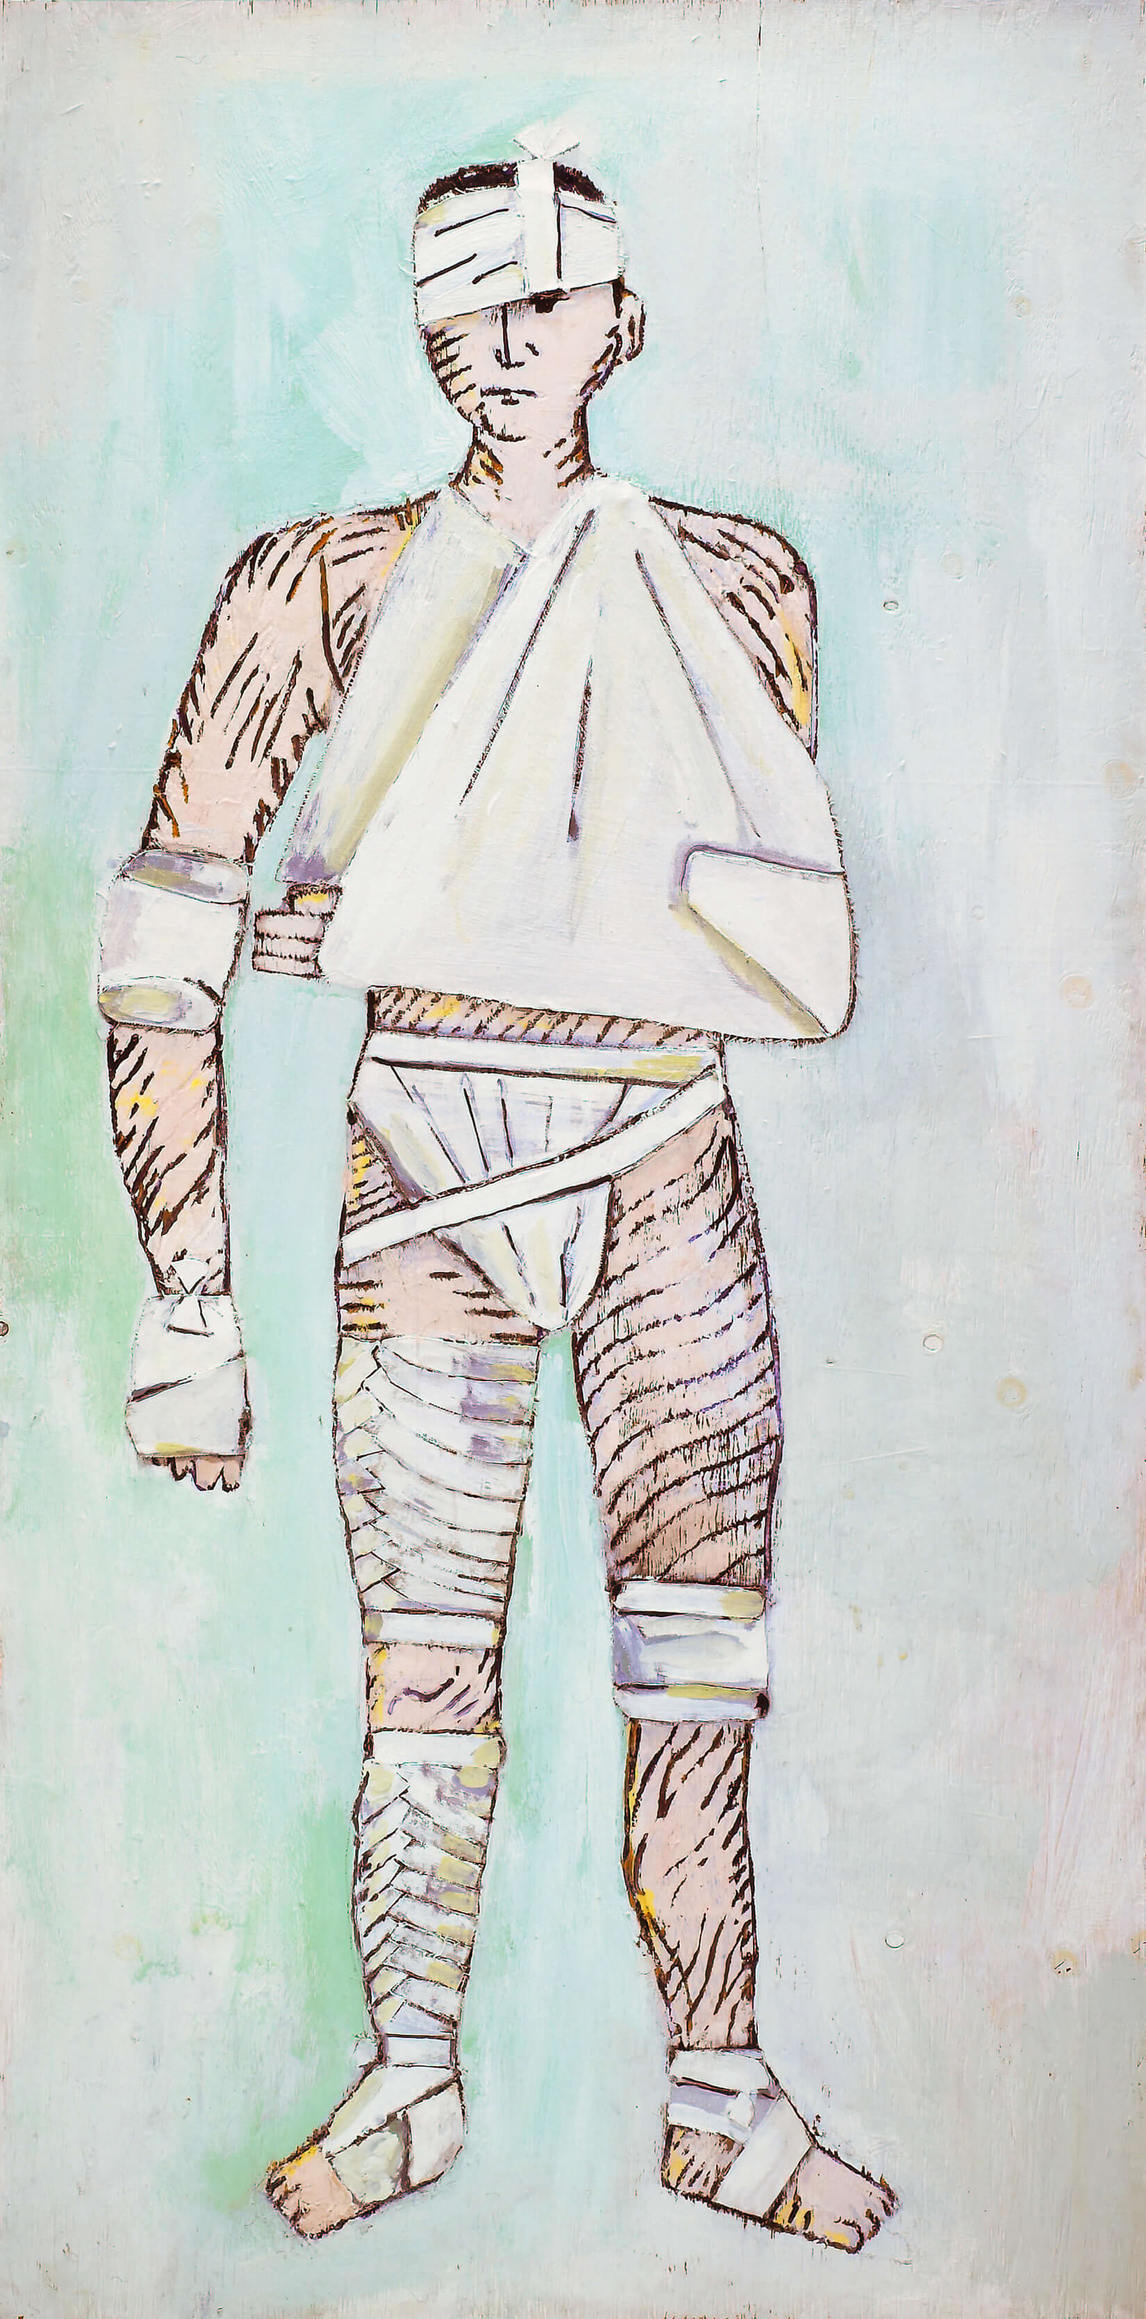  The Bandaged Man, 1973, by Paterson Ewen